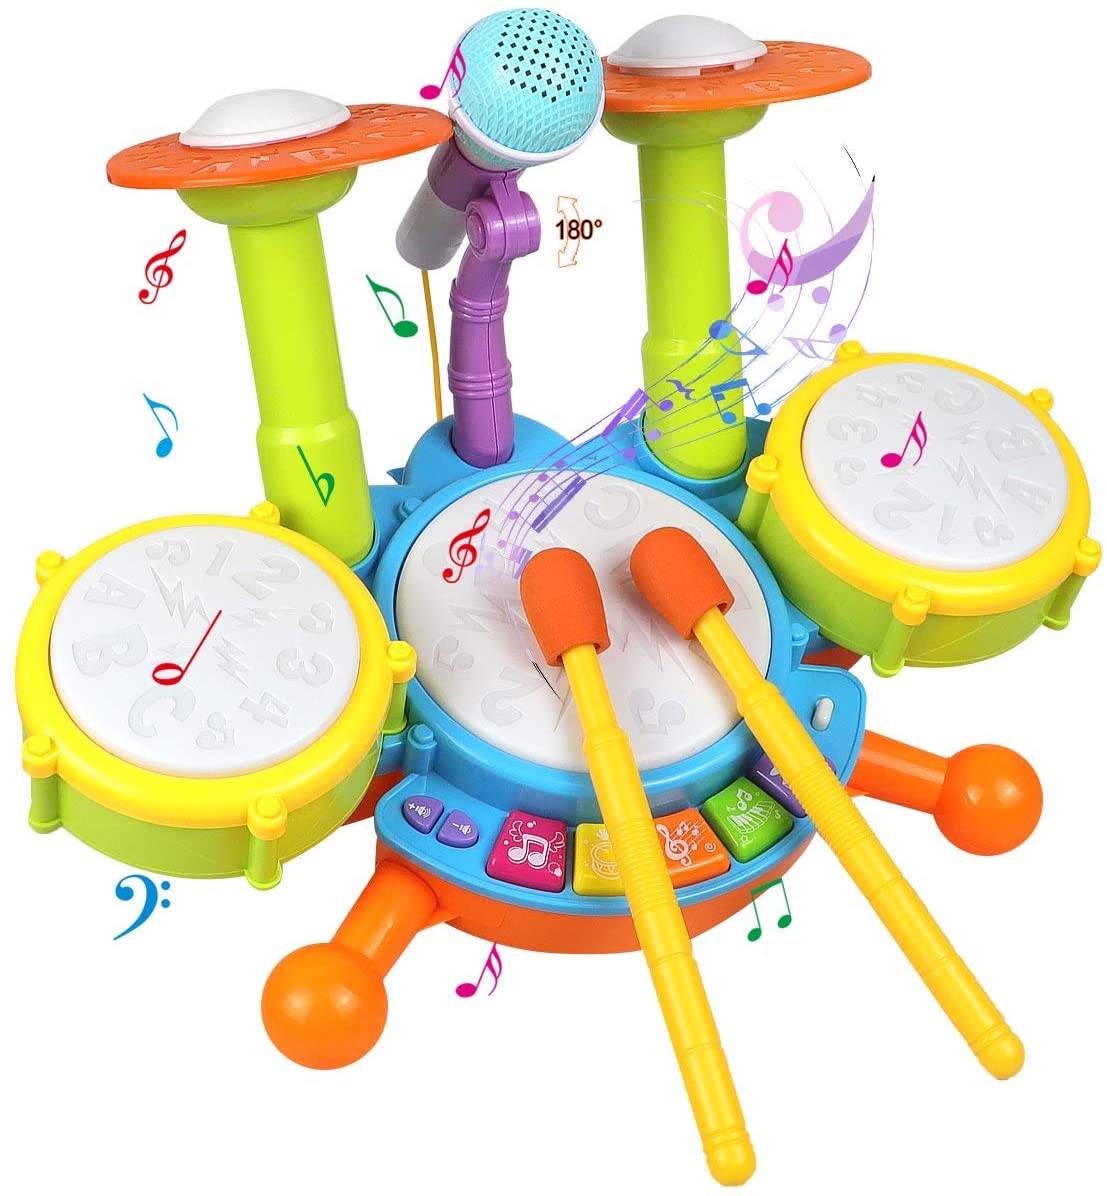 Prextex Kids Electric Toy Drum Set for Kids Working Microphone Lights and Adjustable Sound Bass Drum Pedal Drum Sticks with Little Chair All Included 